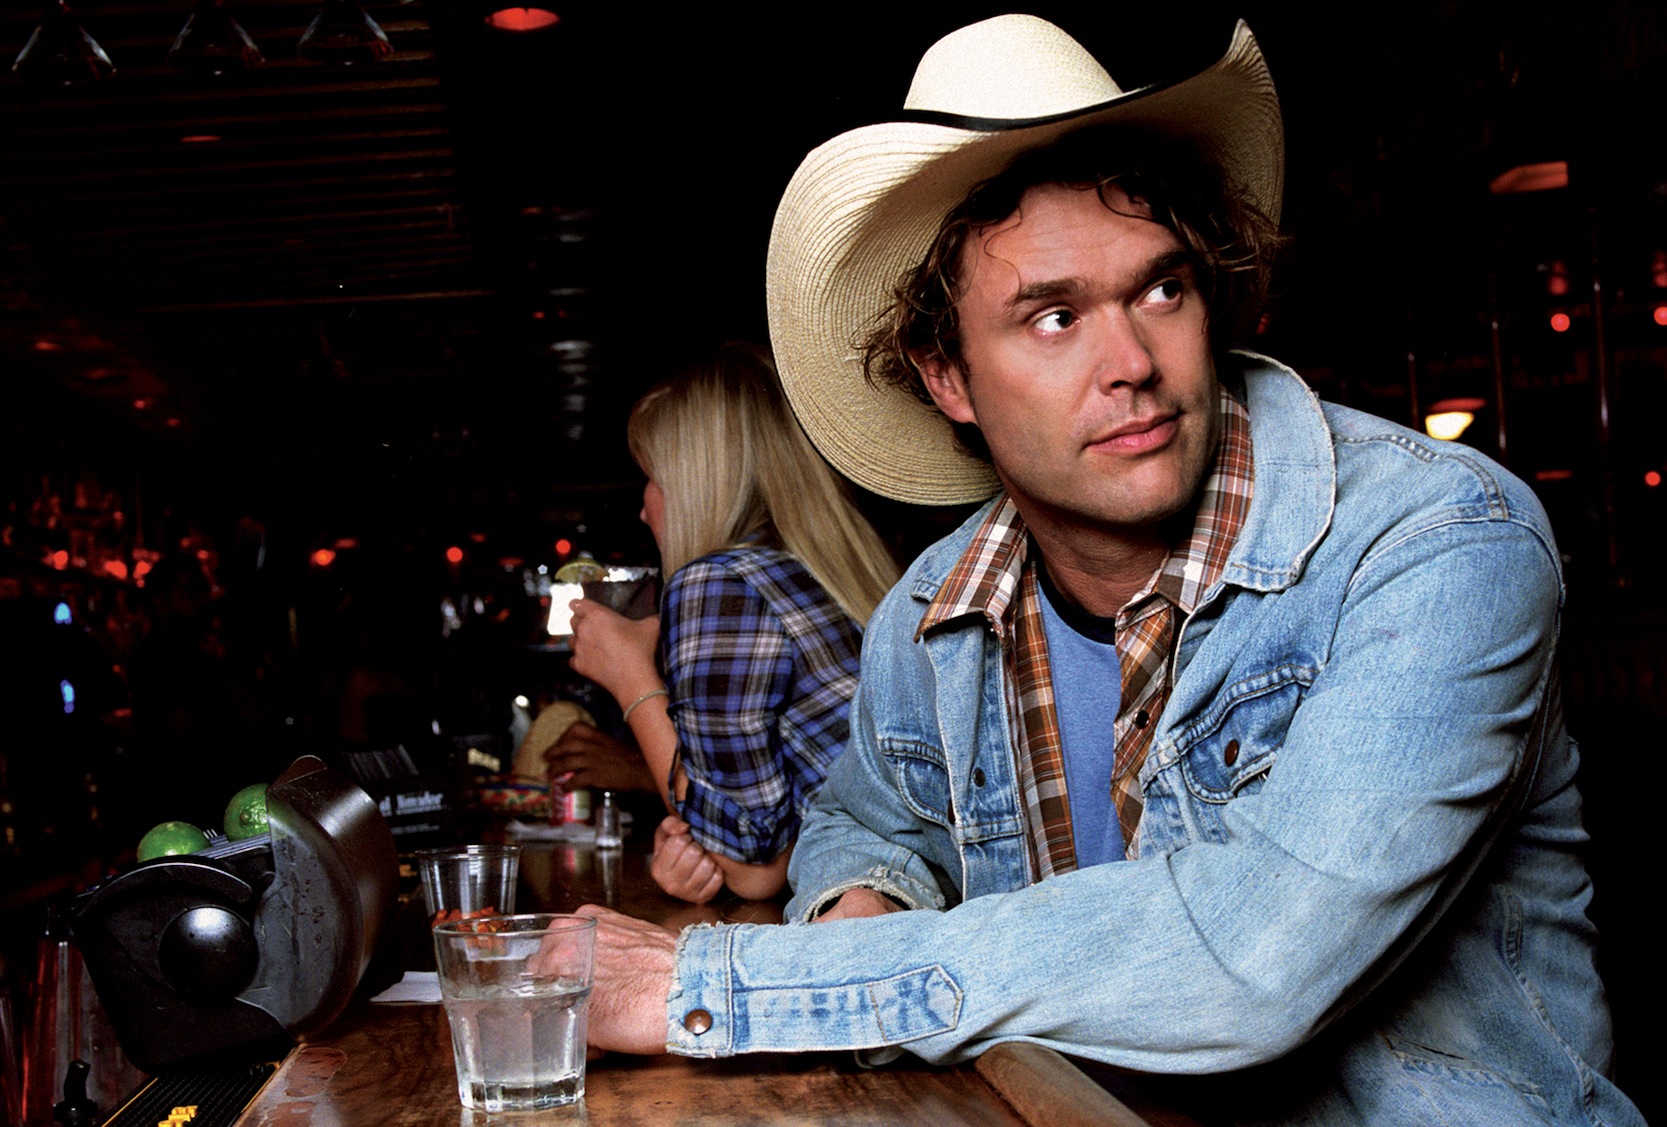 Corb Lund makes an exclusive stop in Jasper